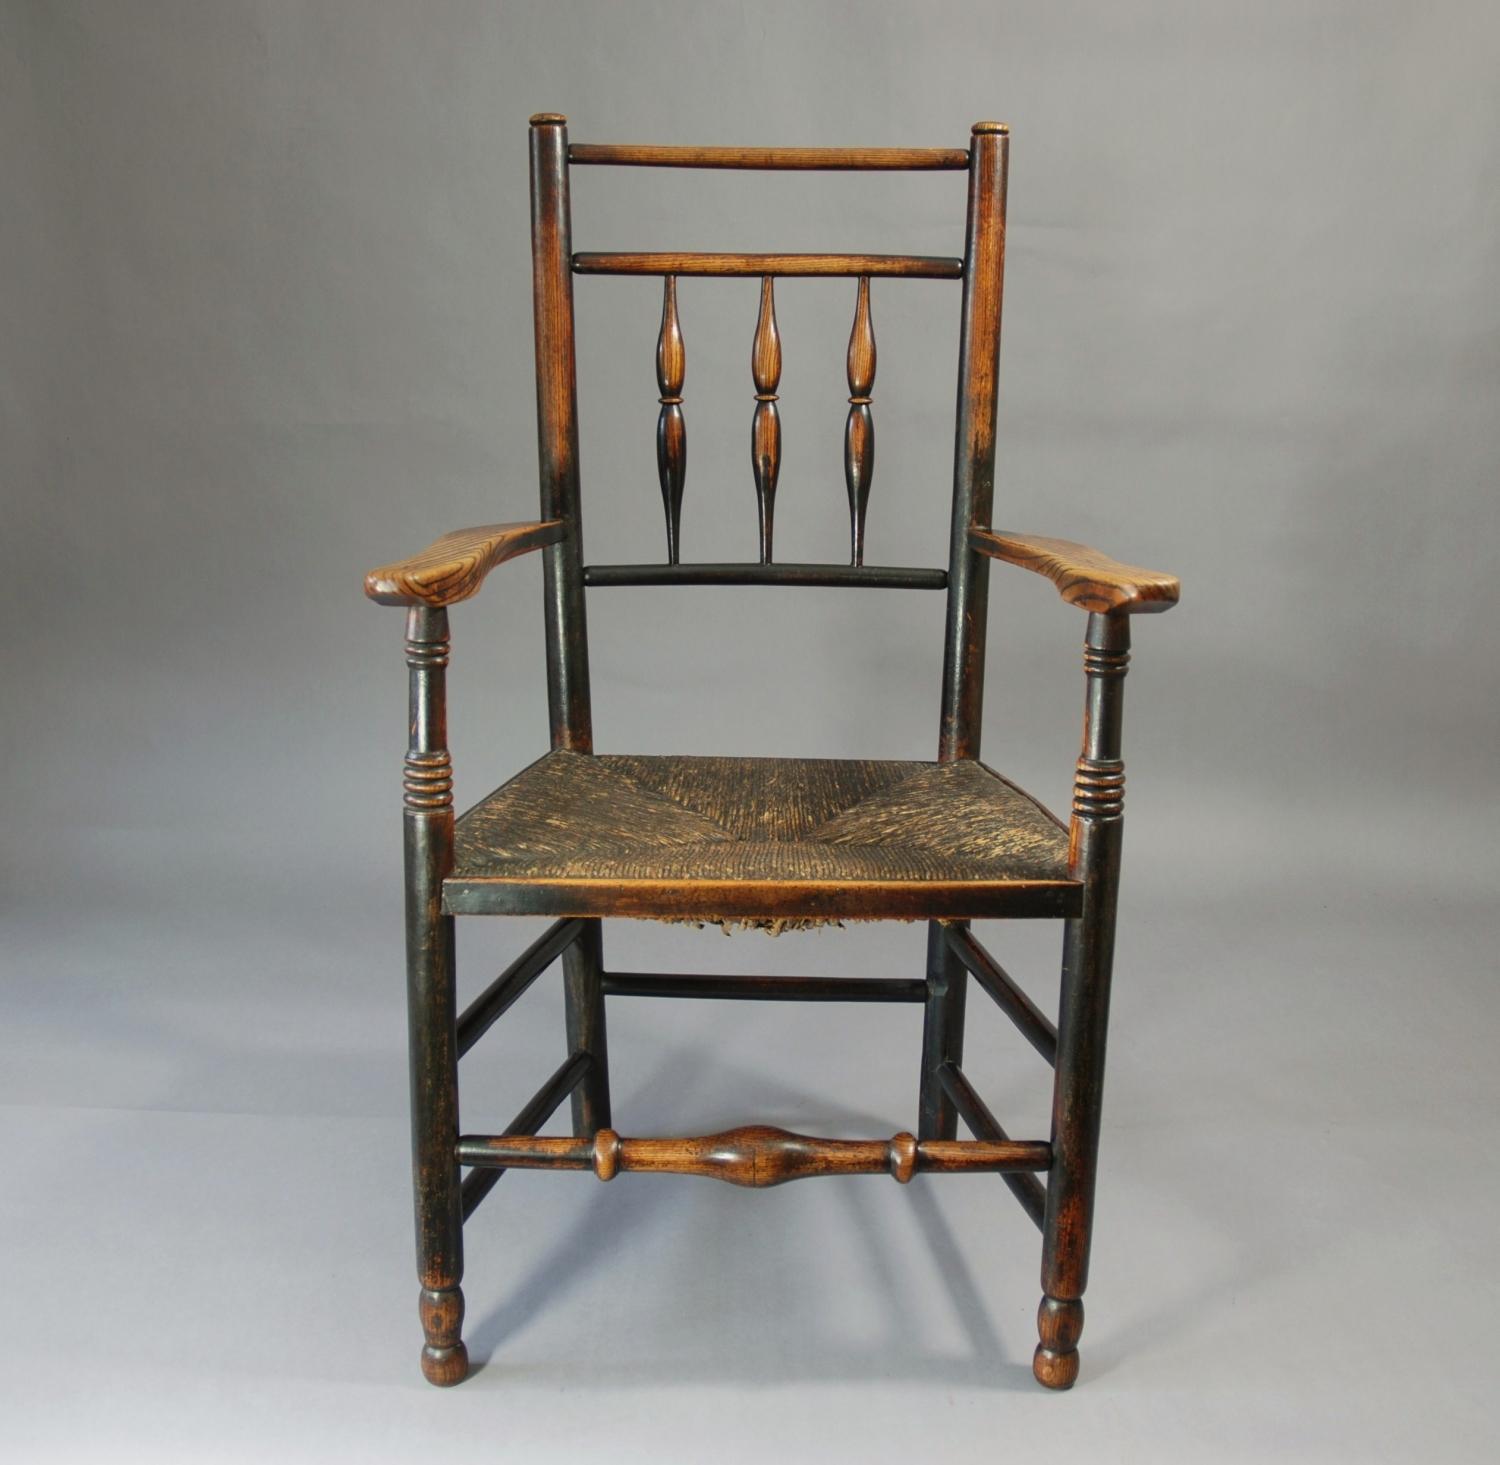 19thc ash spindle back chair with rush seat